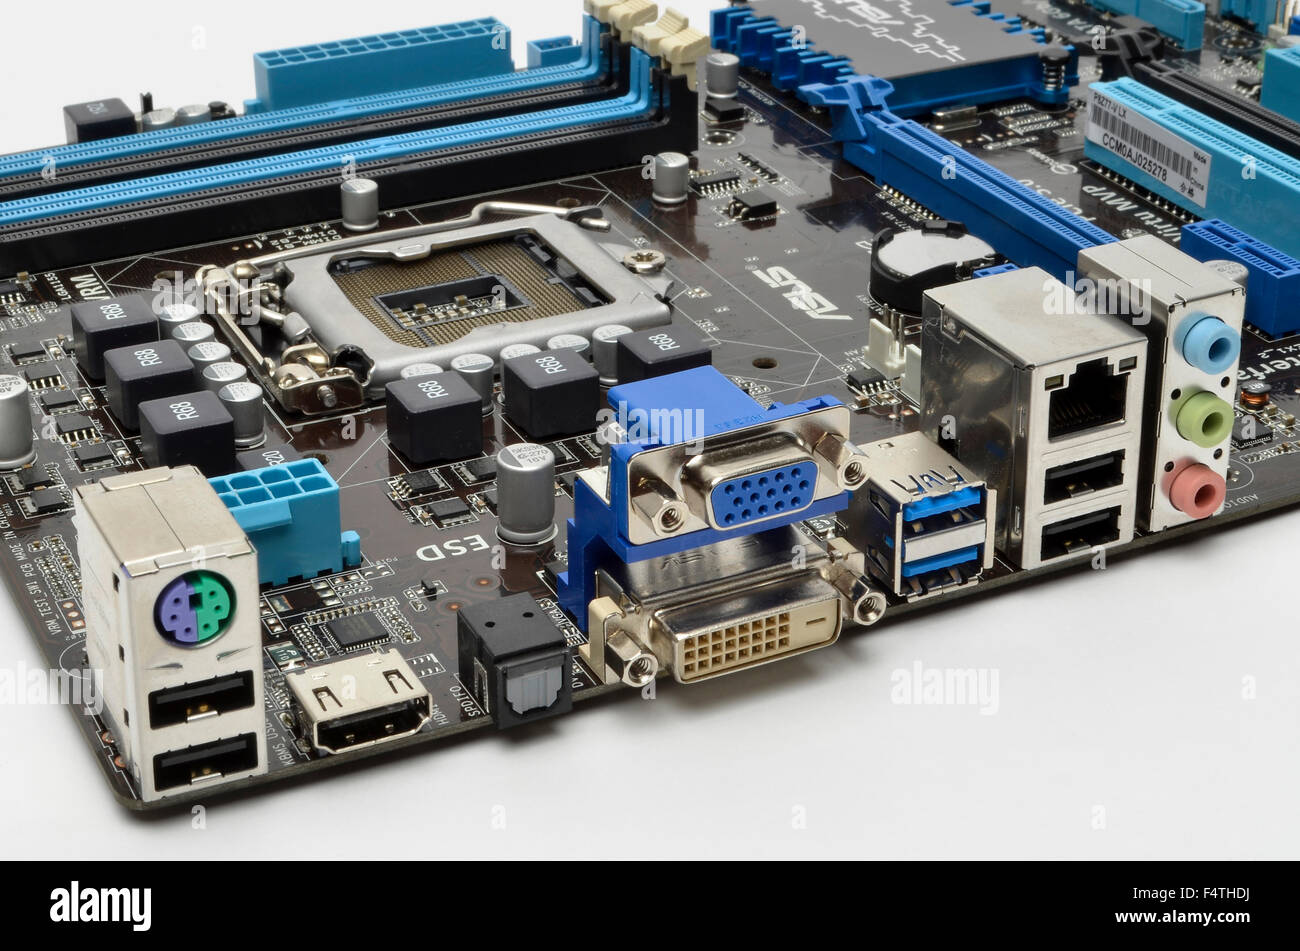 I/O ports on the rear of an ASUS motherboard, including keyboard, USB, HDMI, S/PDIF, VGA, DVI-D, ethernet, and audio sockets. Stock Photo